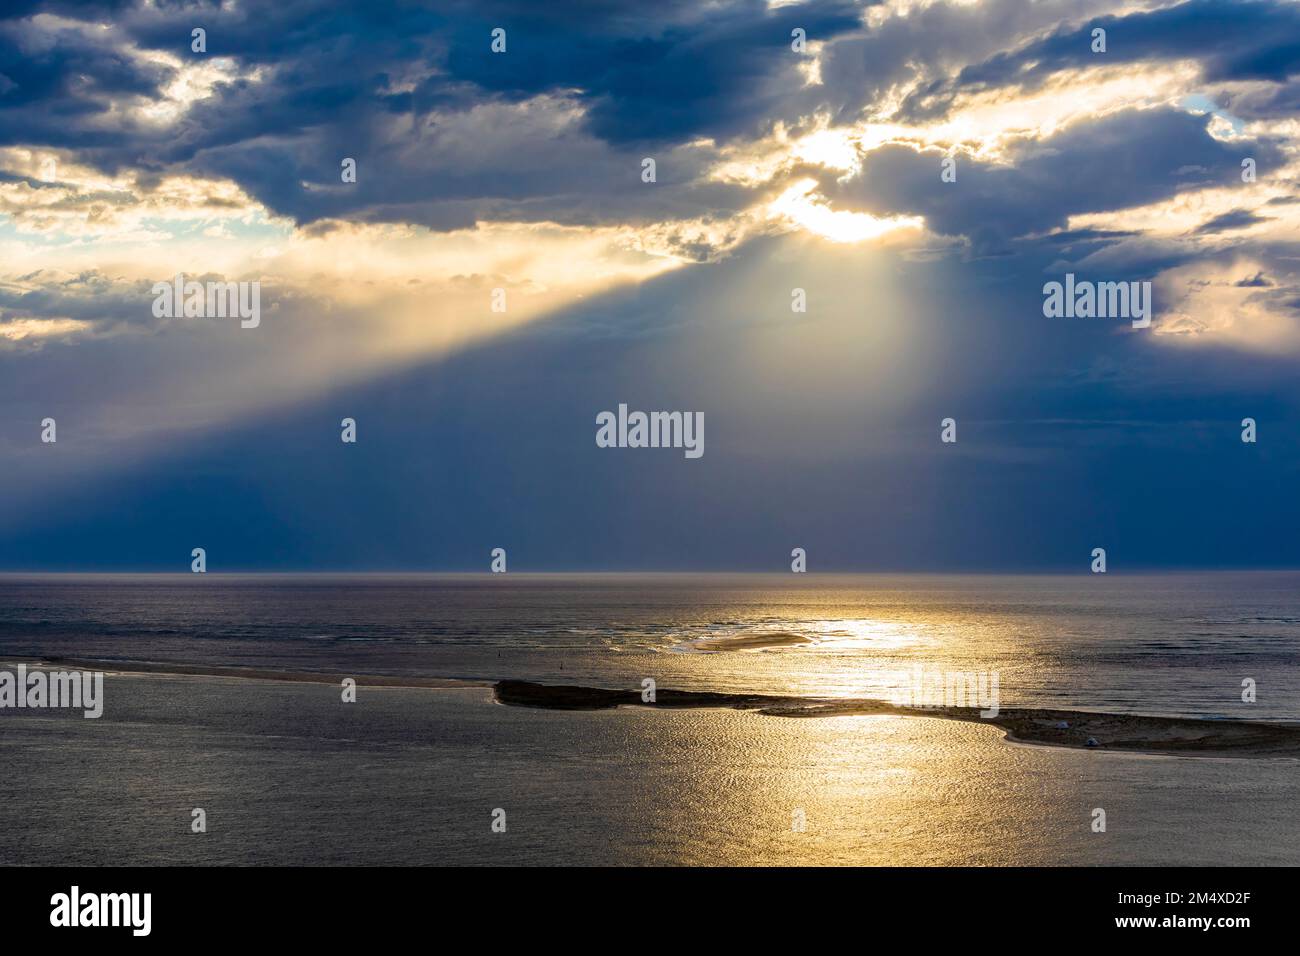 France, Nouvelle-Aquitaine, Arcachon Bay at cloudy sunset Stock Photo